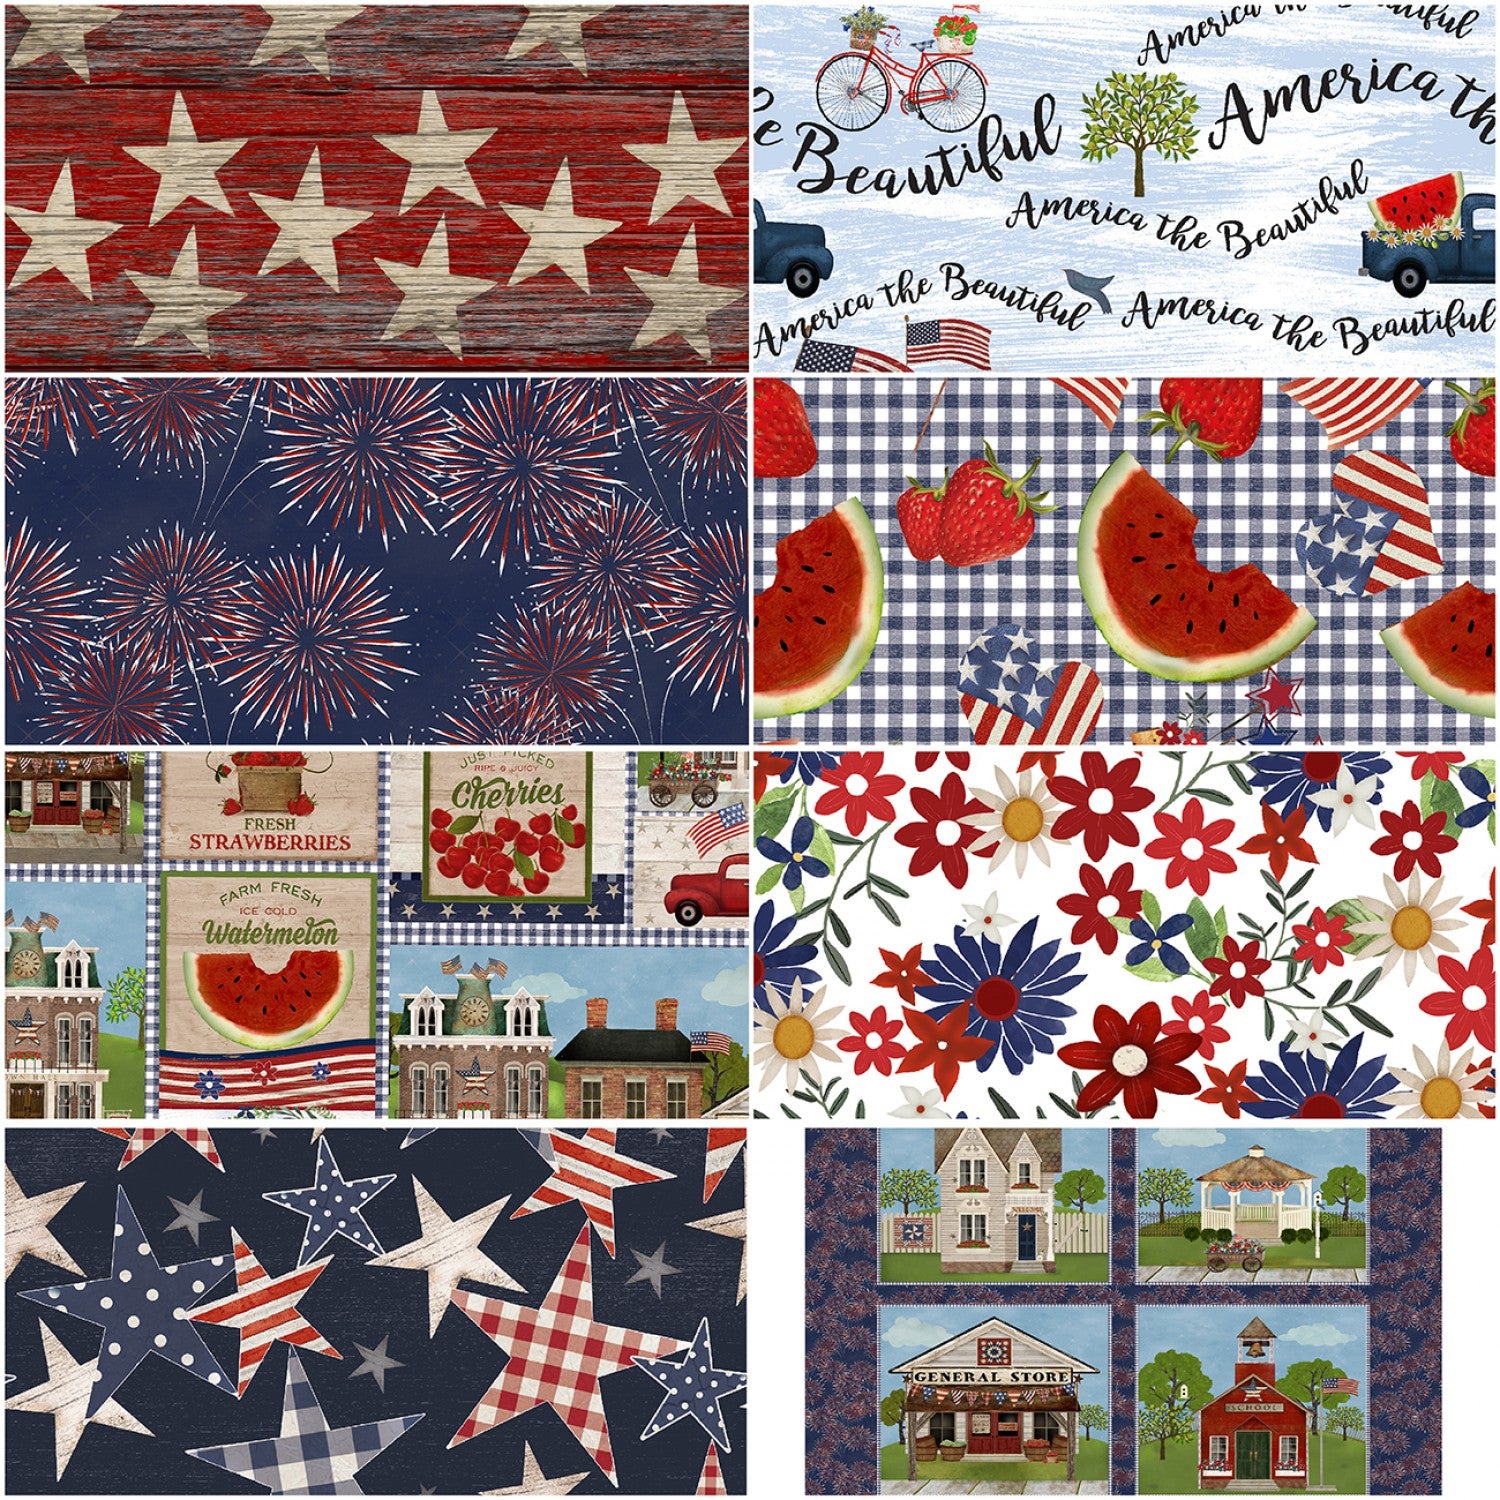 Sweet Land of Liberty - Stars and Stripes Navy by Beth Albert